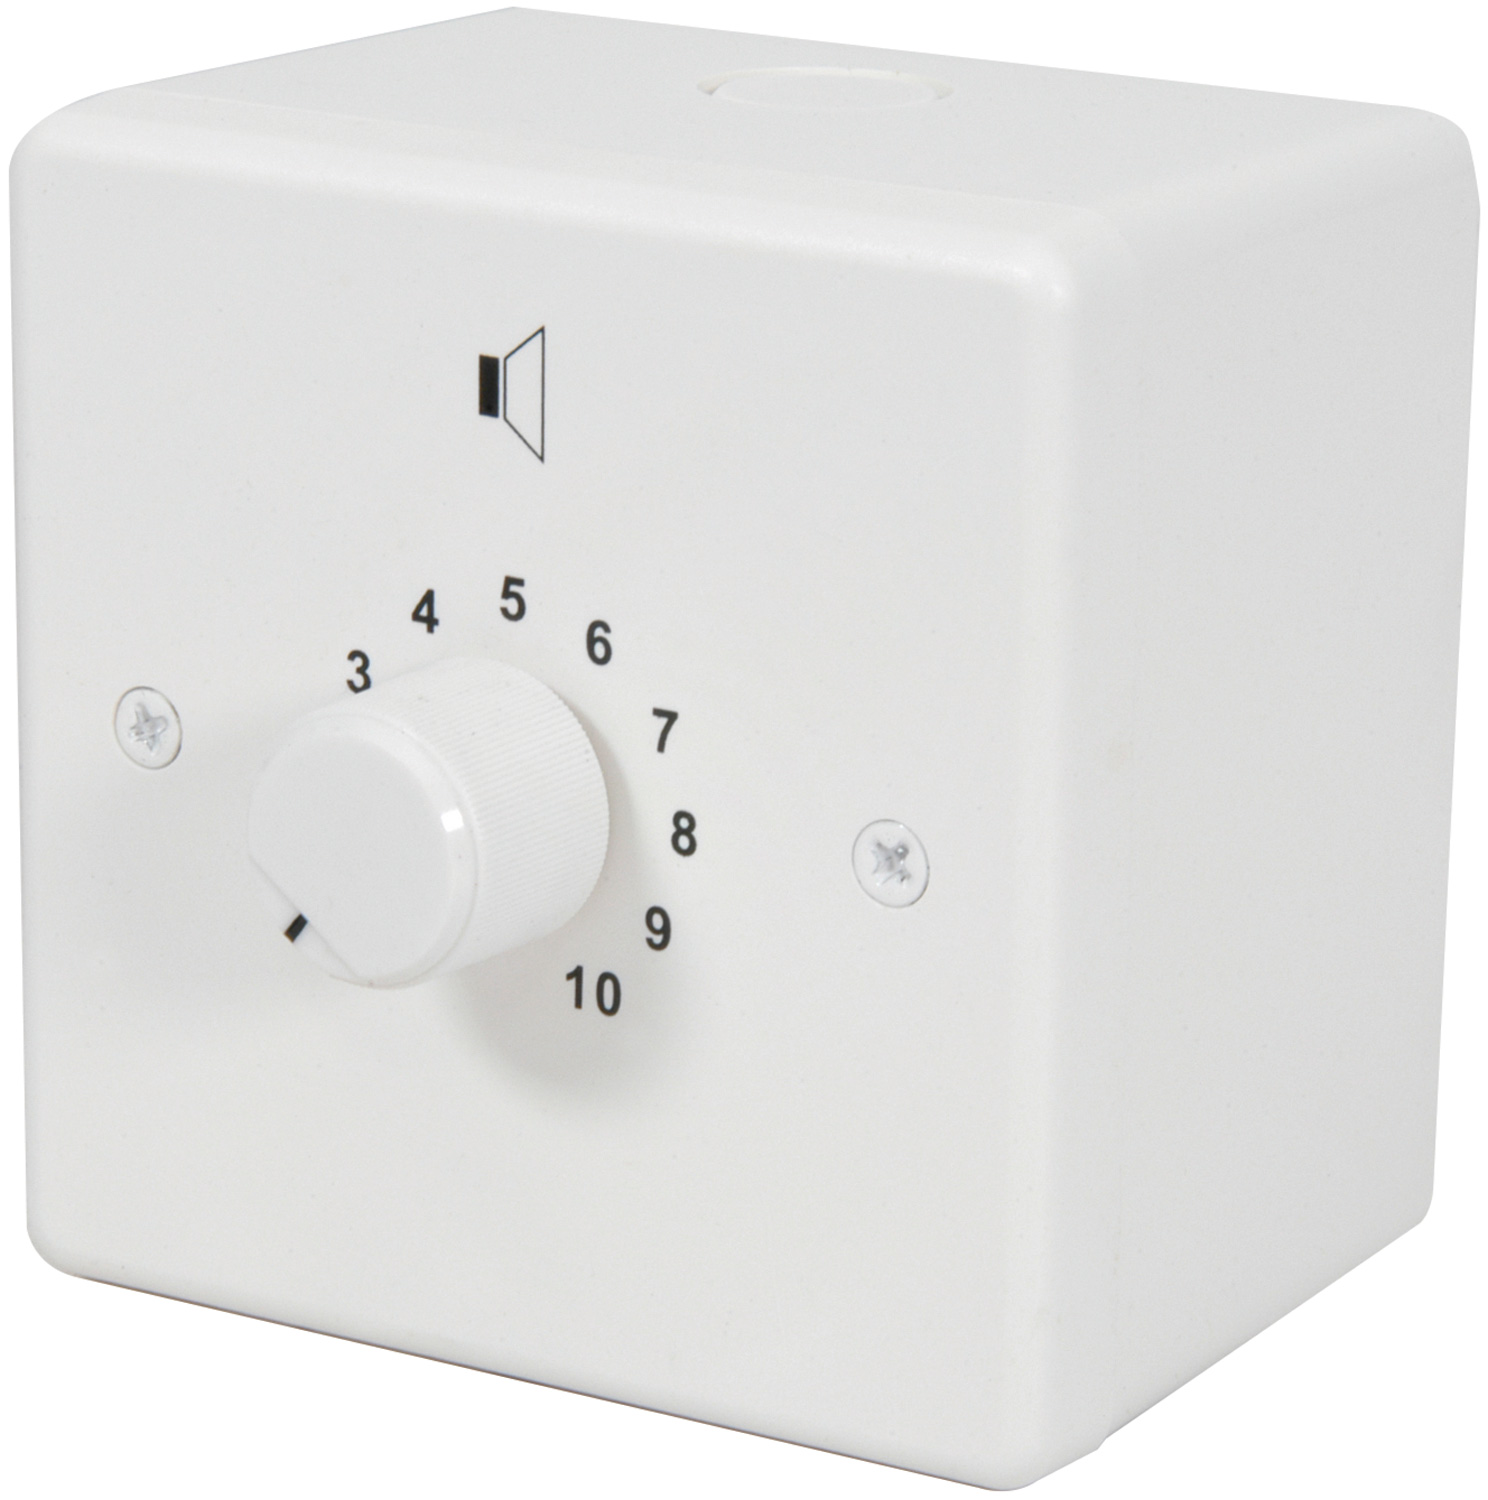 100V Volume Controls - Relay Fitted 100V volume control, relay fitted, 50W